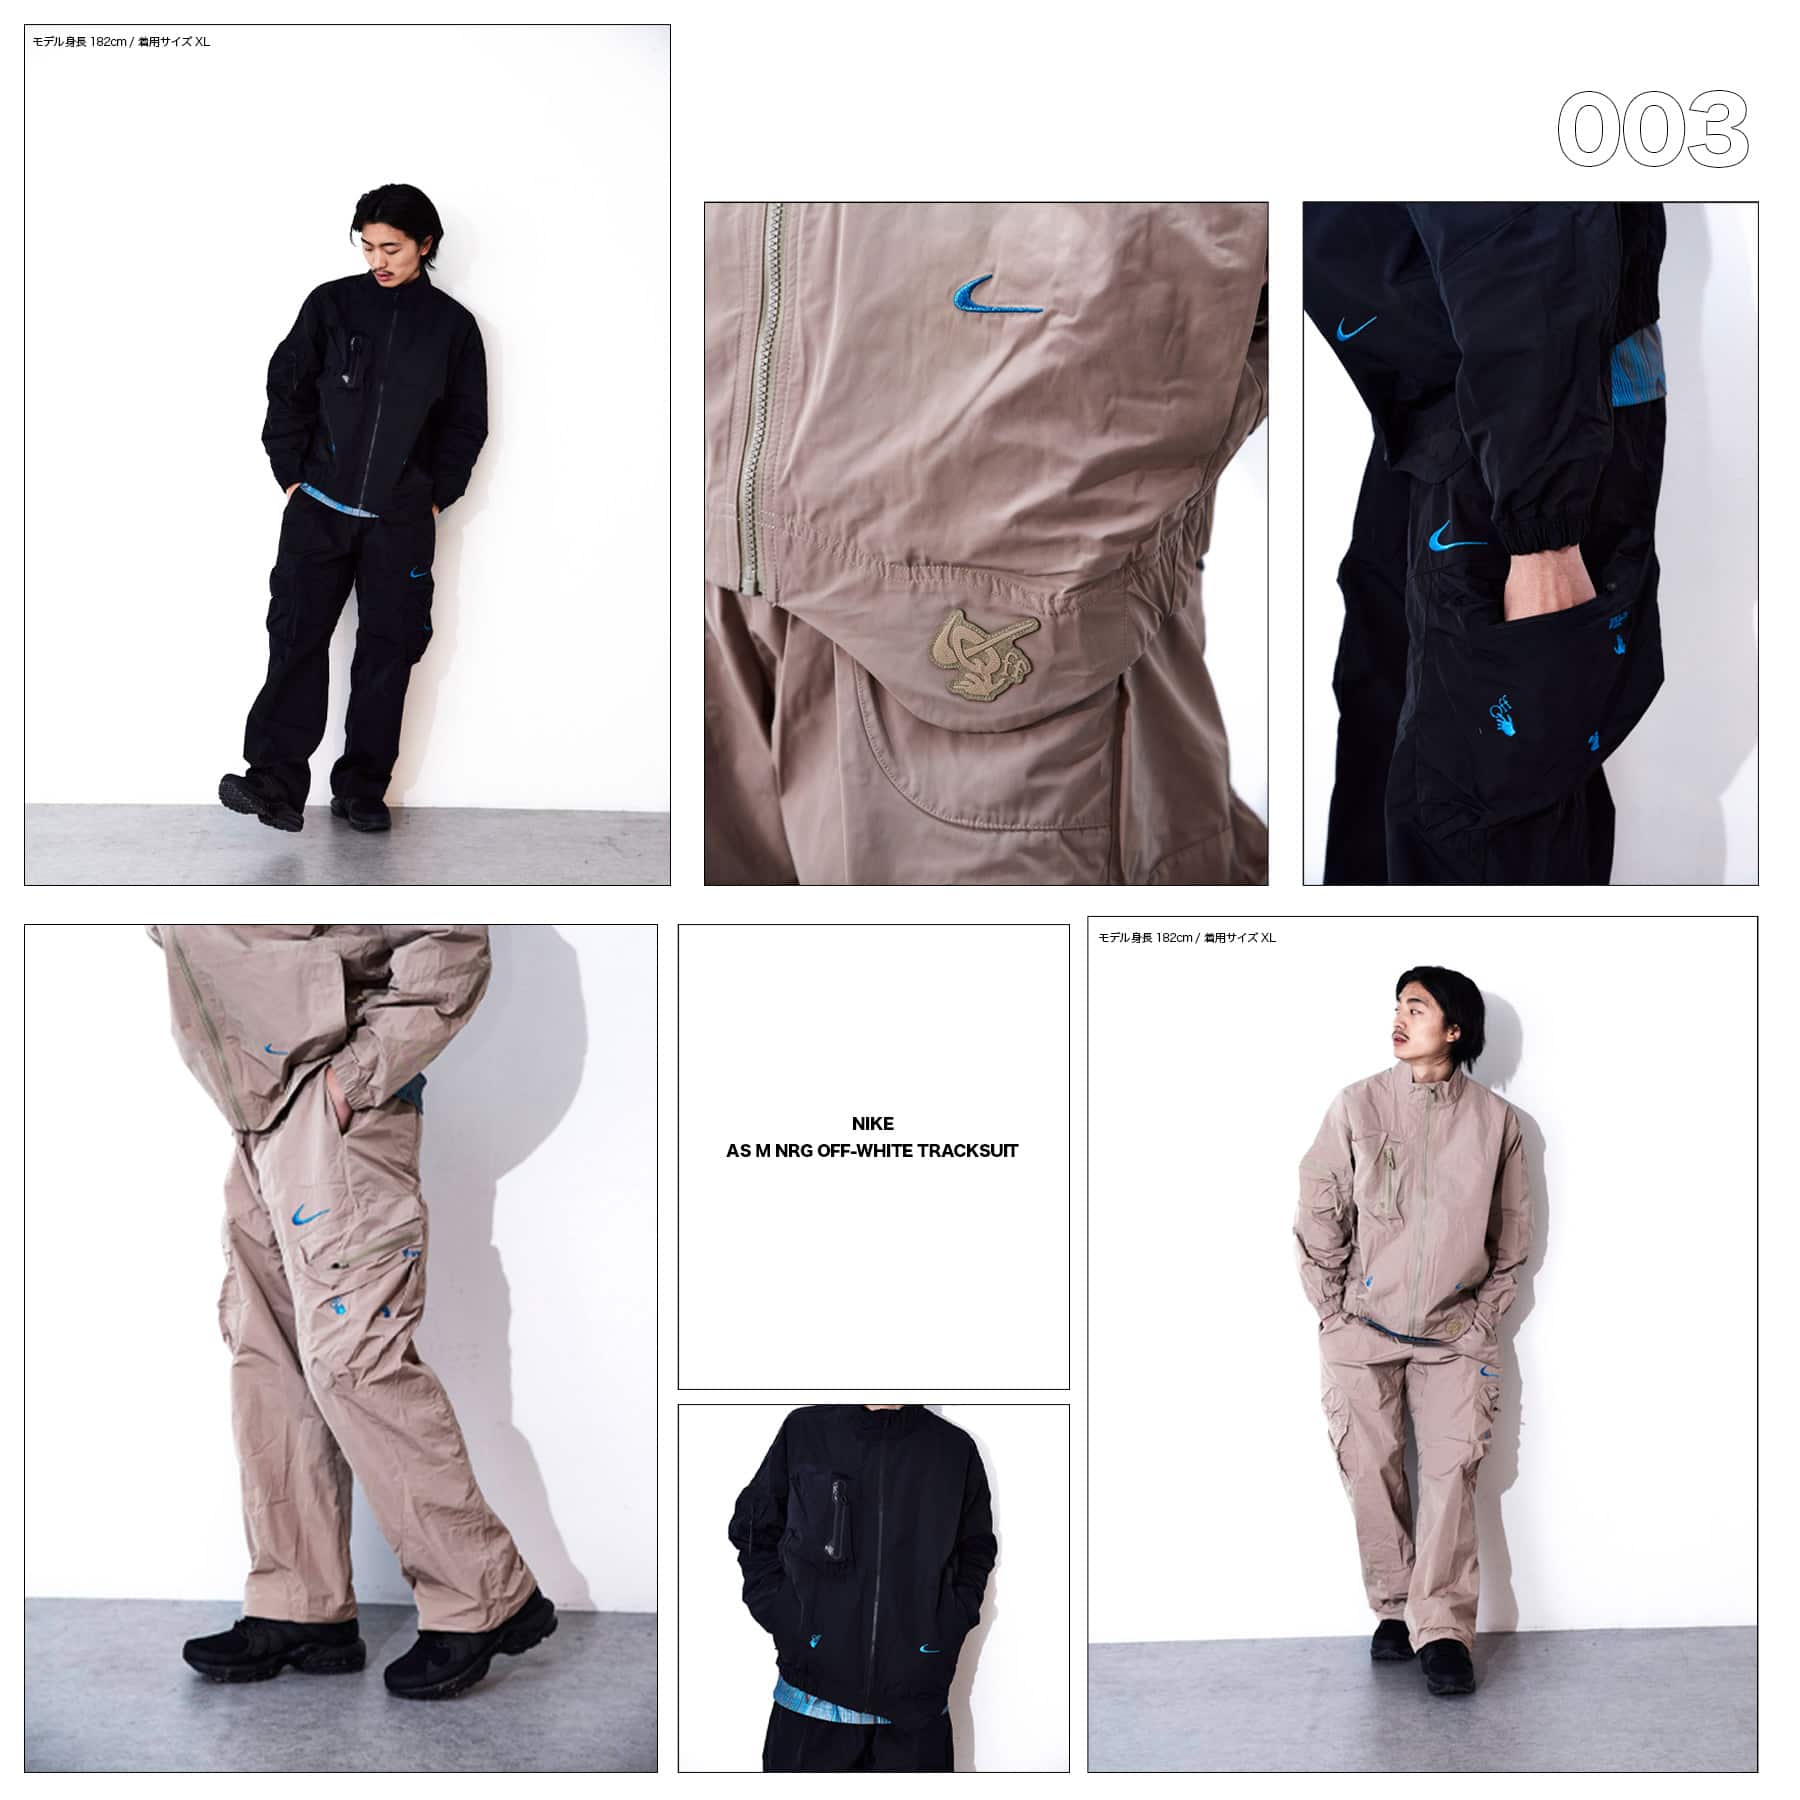 Nike x Off-White Men's Tracksuit 003お値下げ交渉承ります